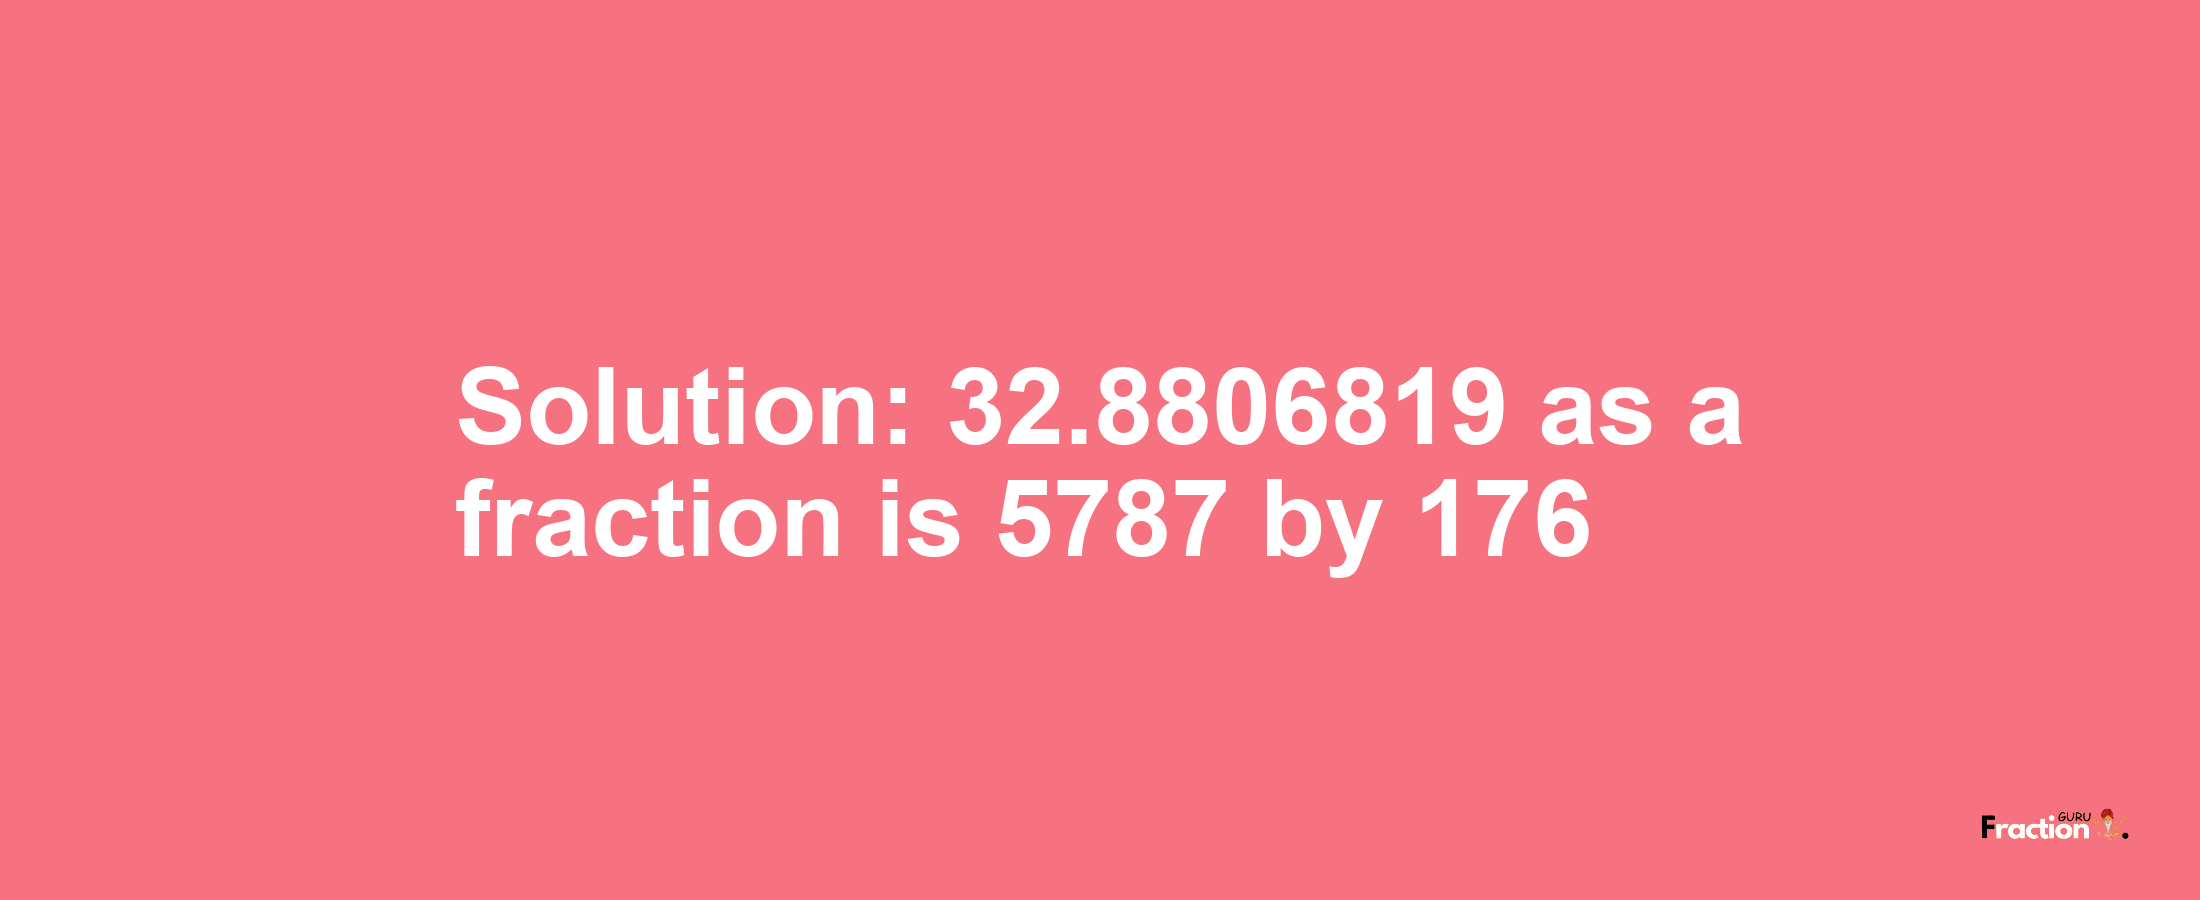 Solution:32.8806819 as a fraction is 5787/176